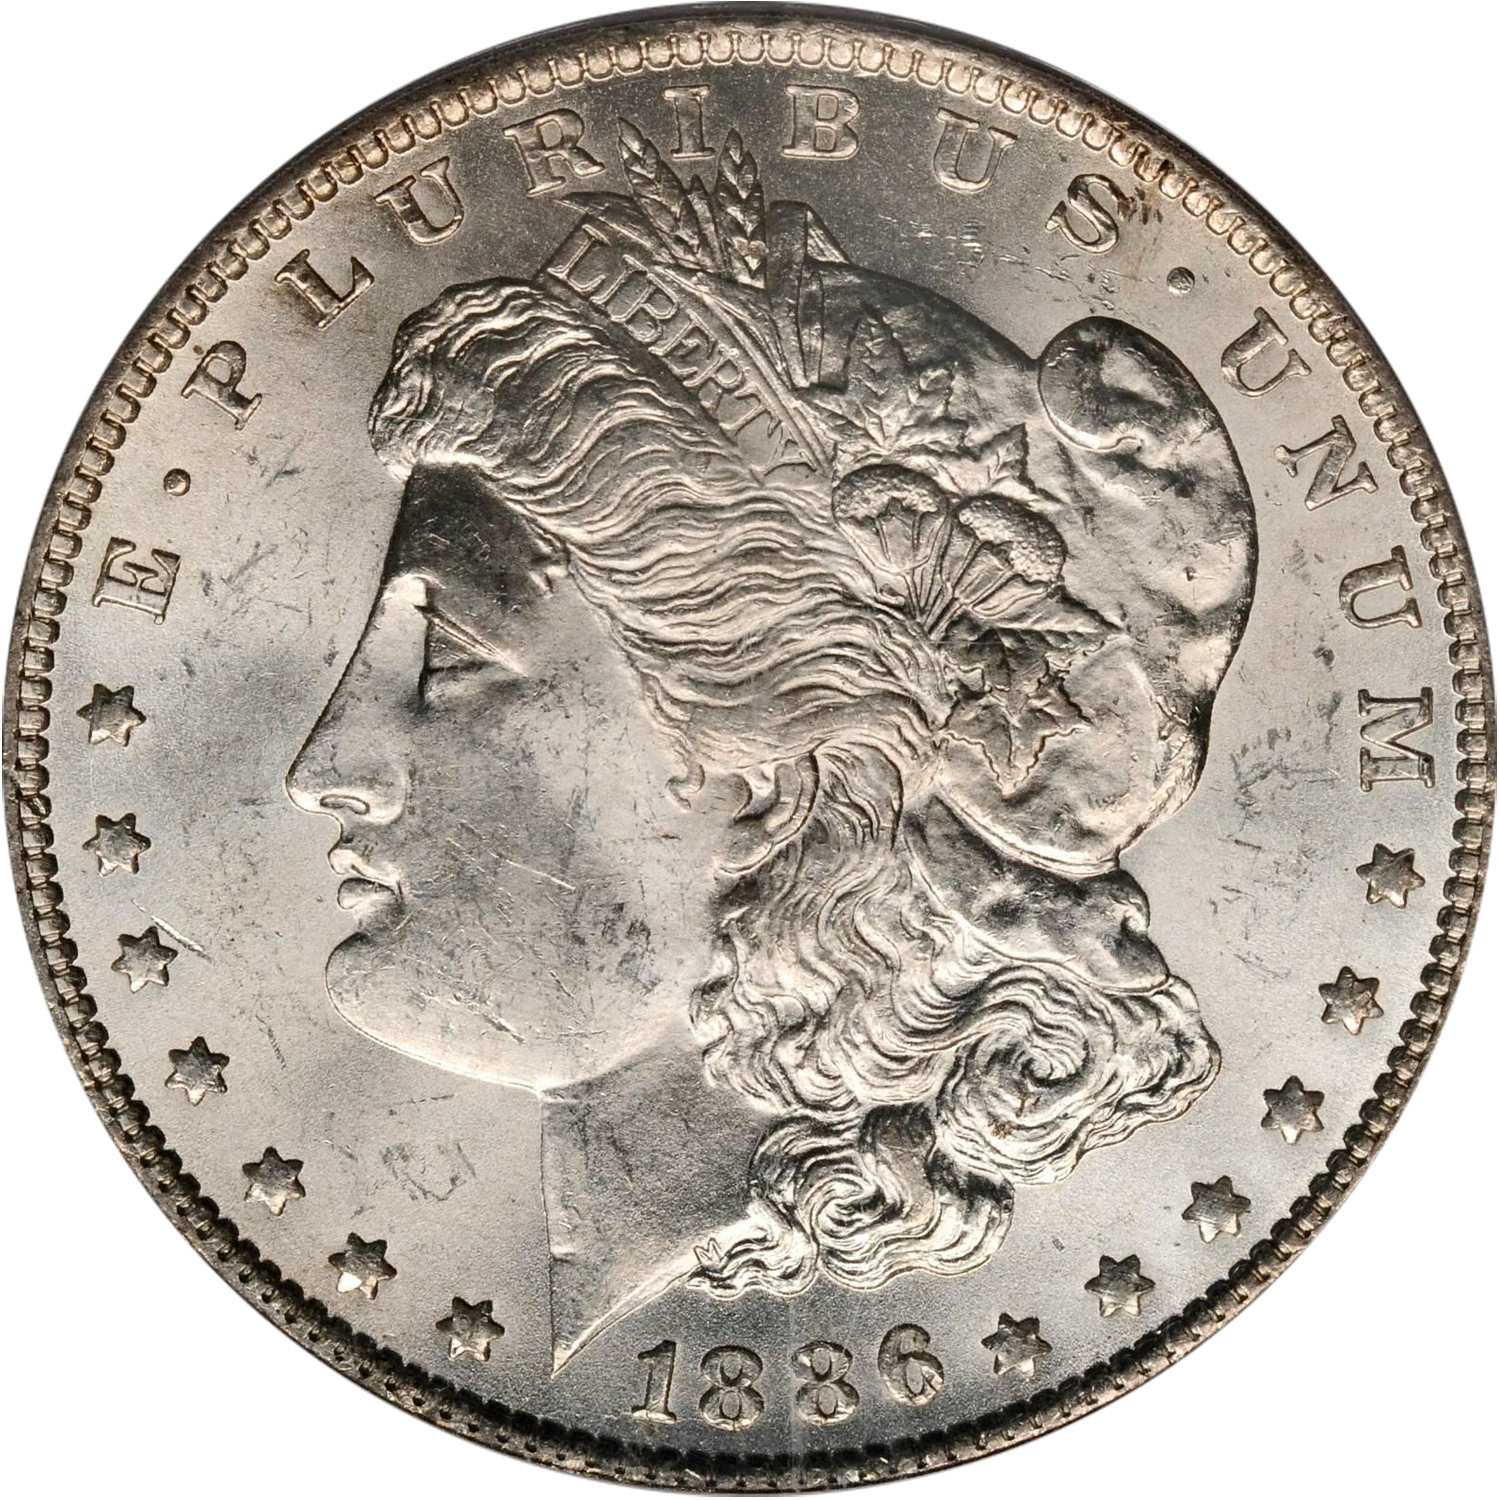 1886 new orleans morgan dollar price guide value